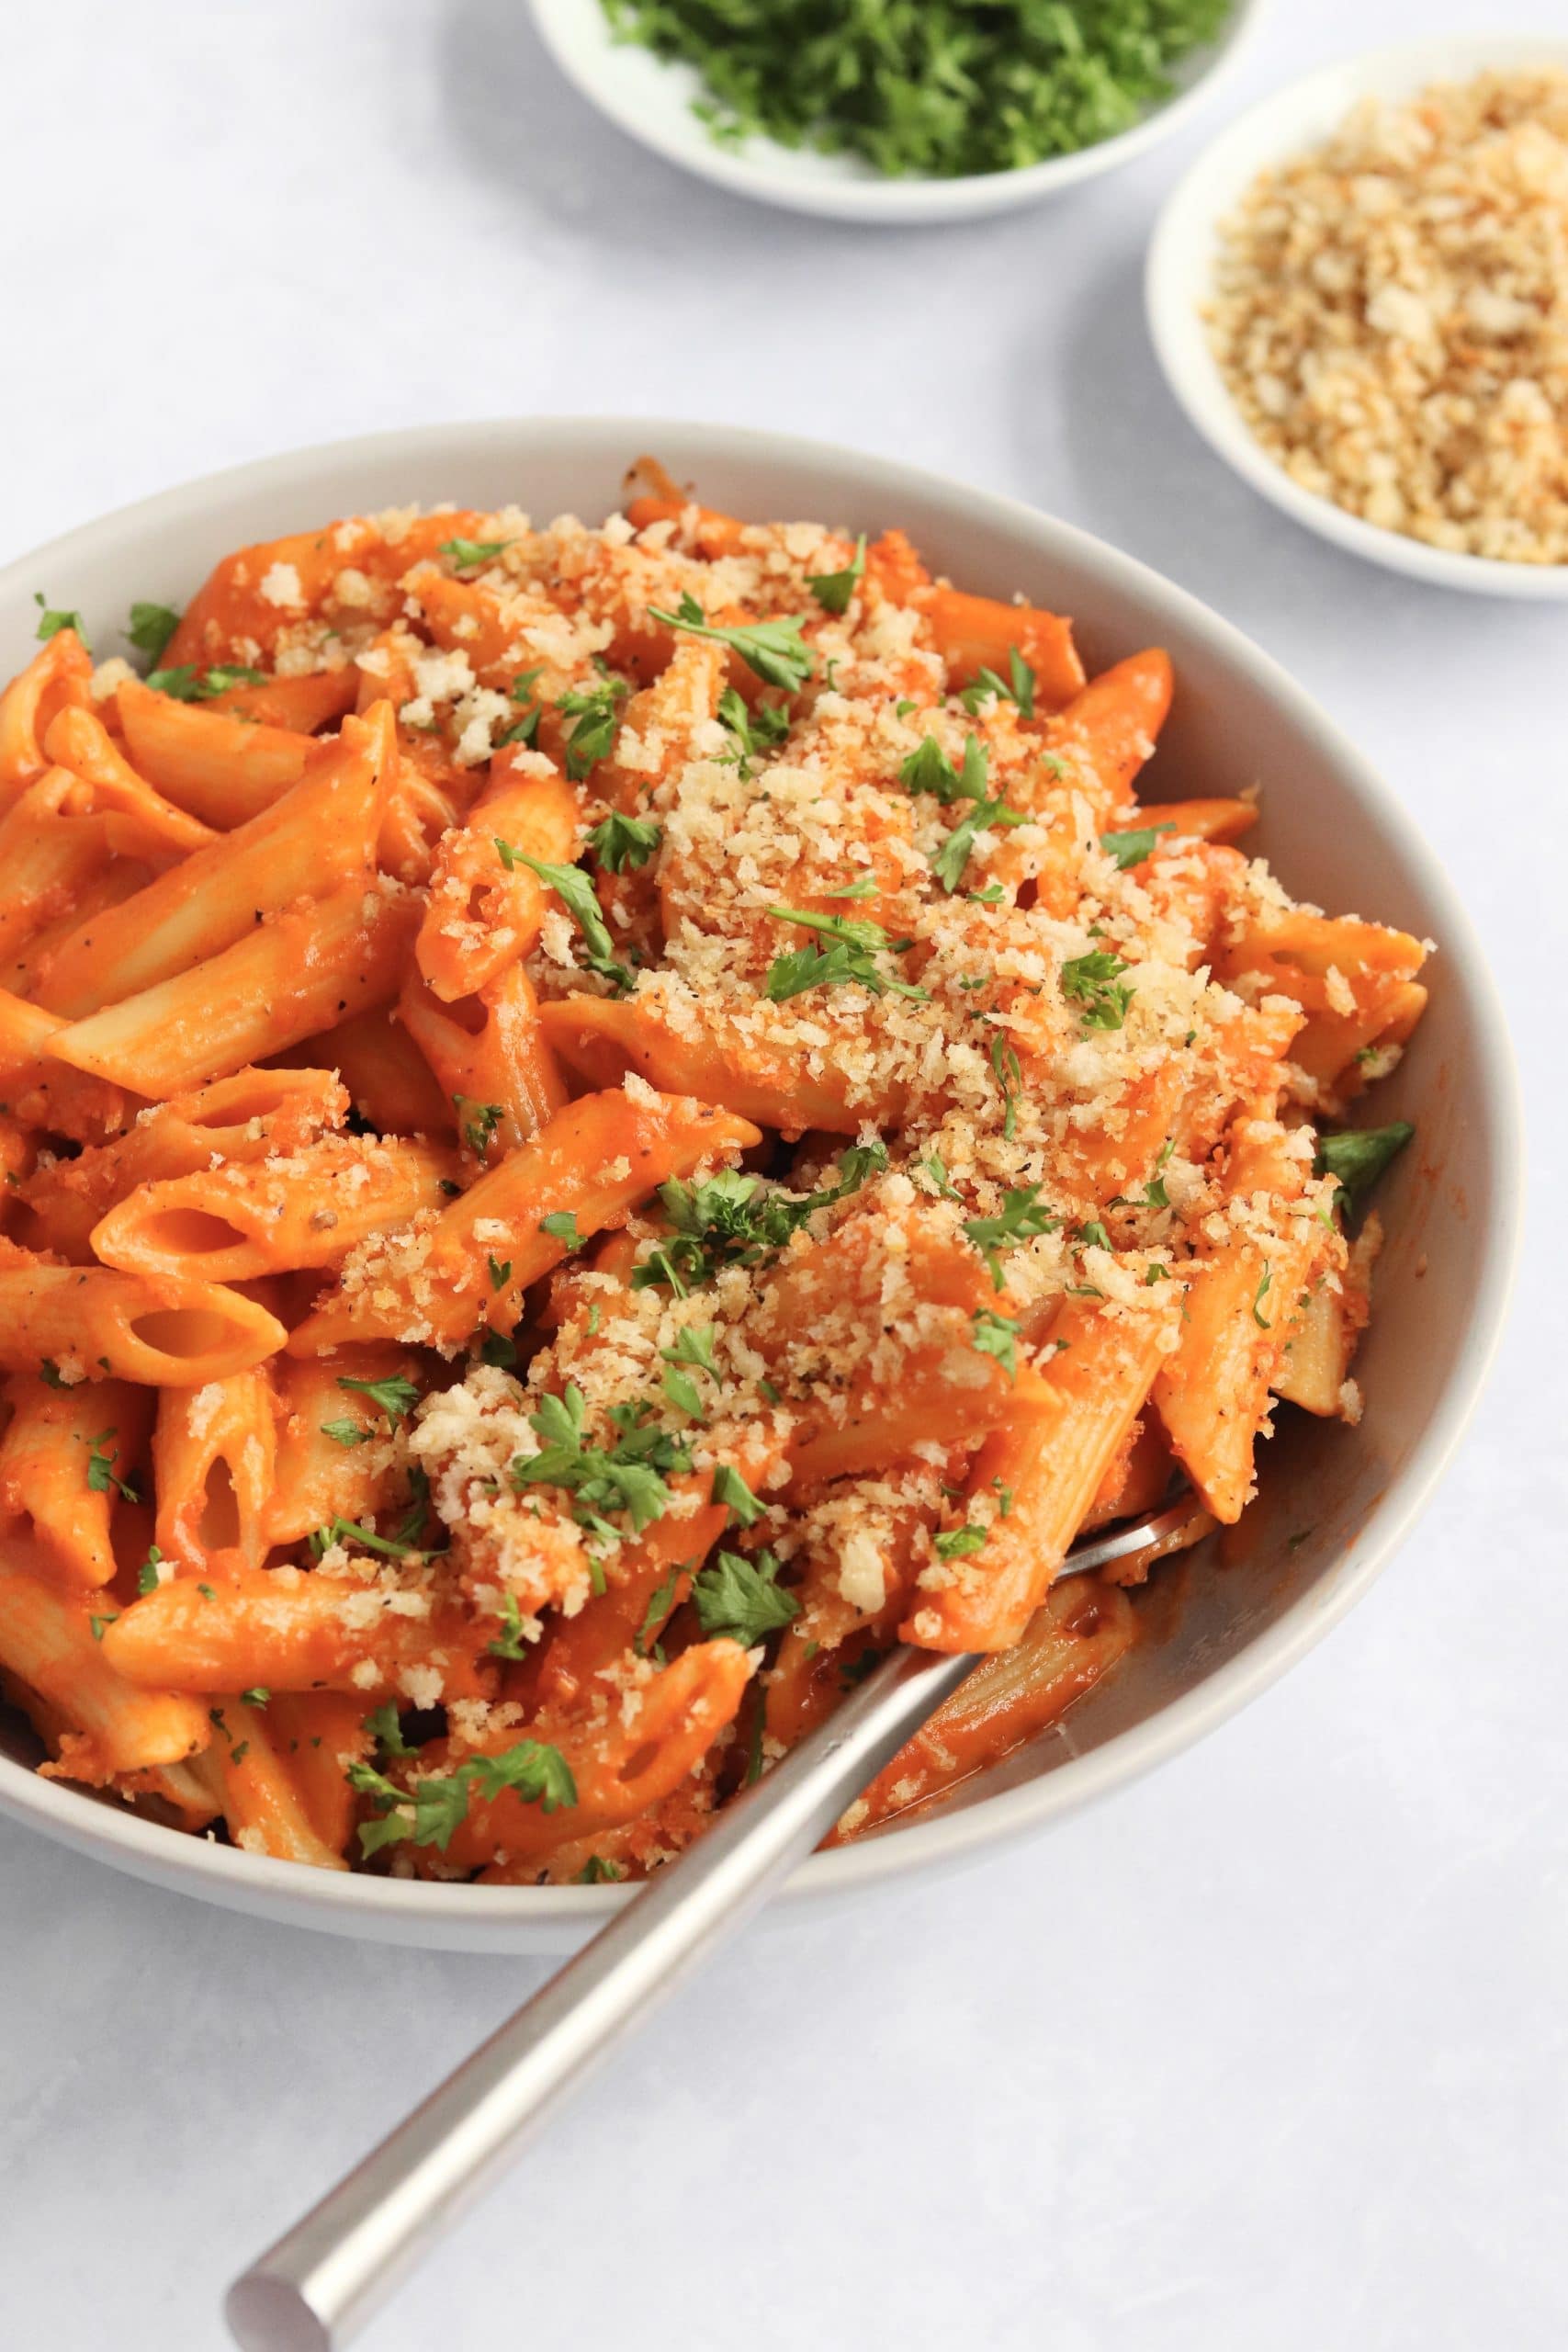 Tomato pasta made with coconut milk and topped with breadcrumbs.